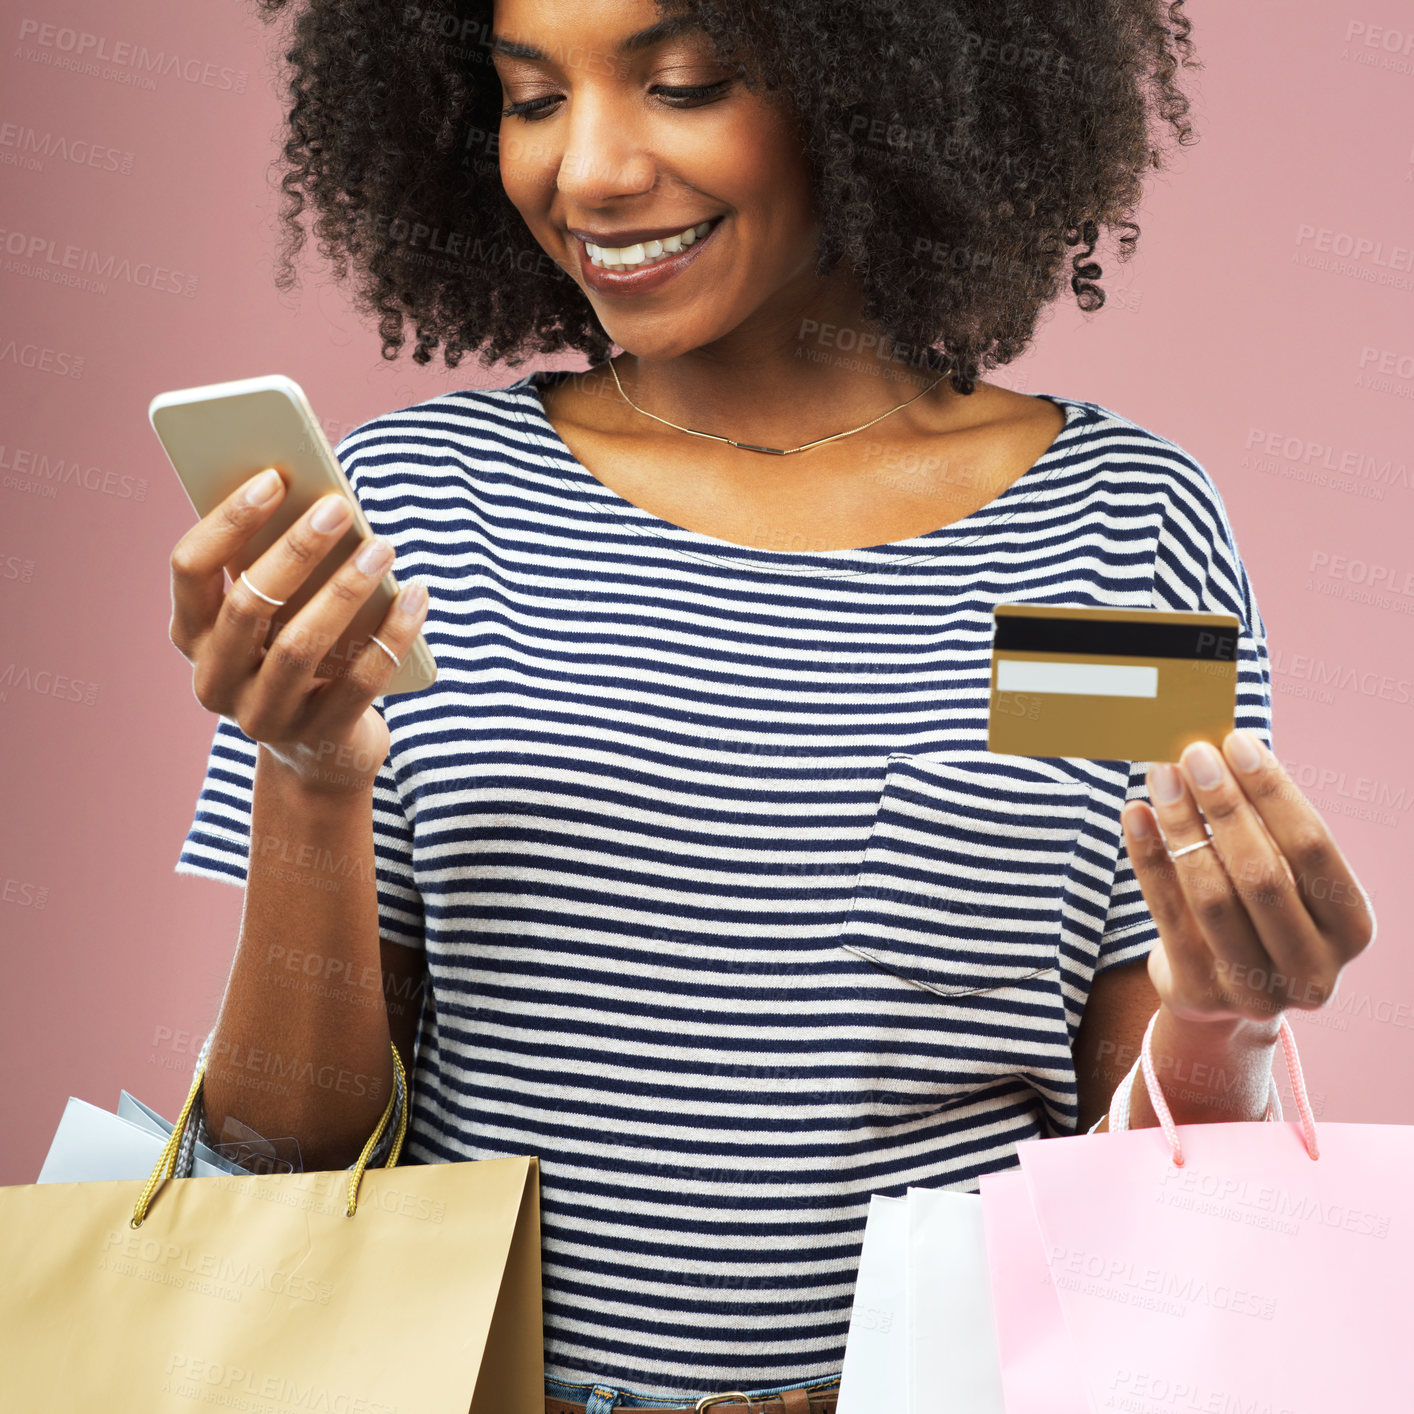 Buy stock photo Studio shot of a young woman doing online shopping while carrying shopping bags